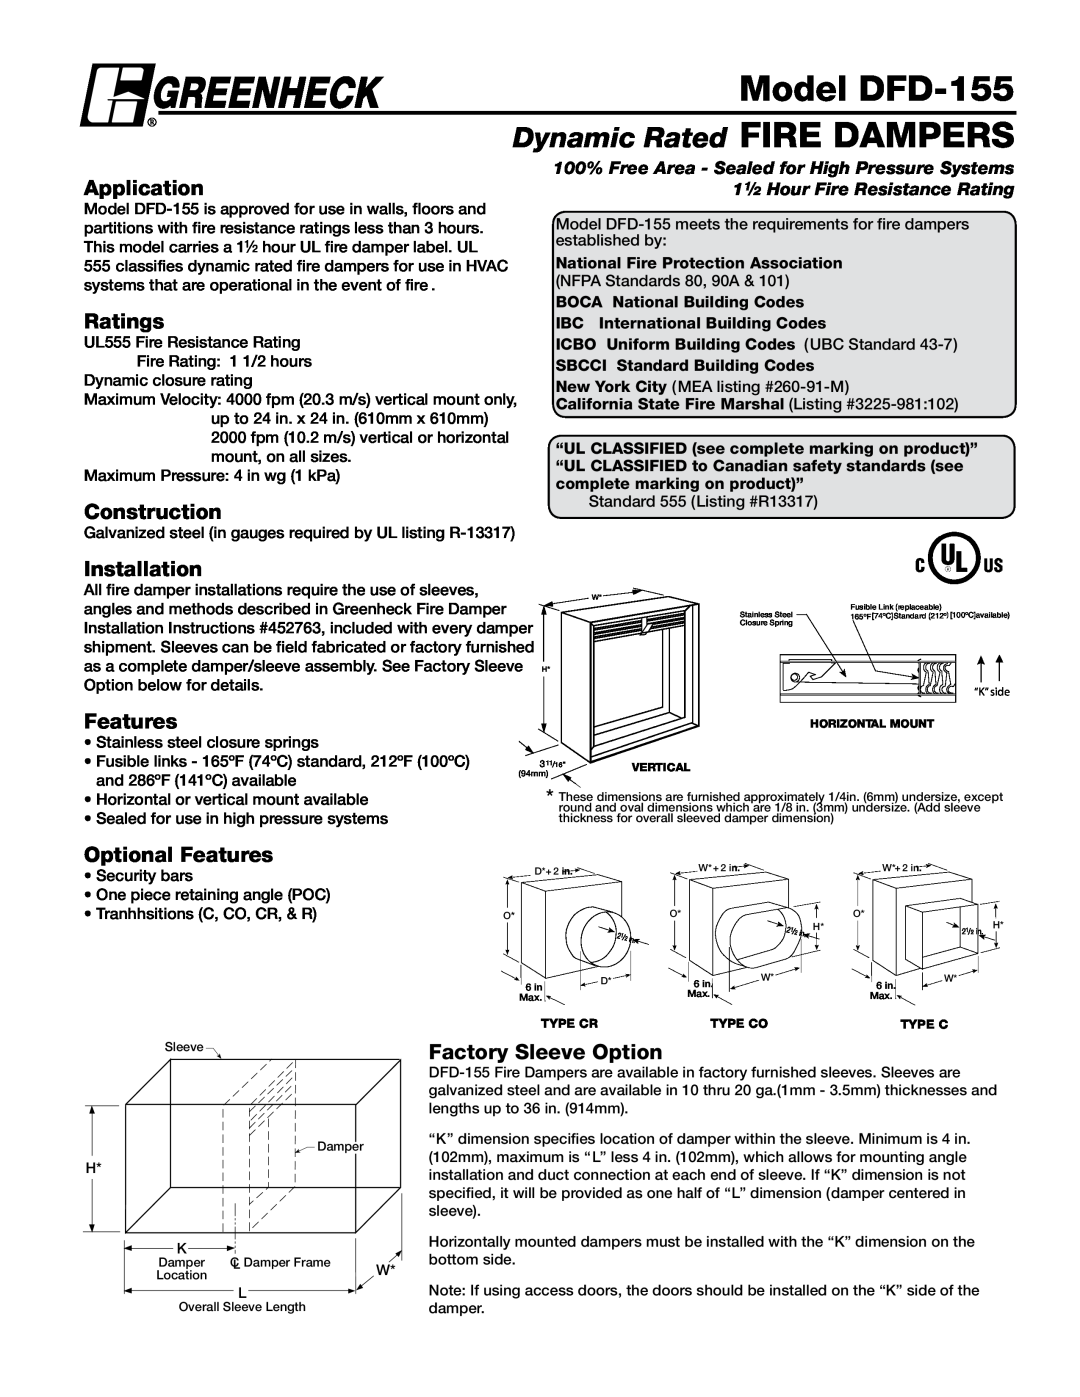 Greenheck Fan DFD-155 installation instructions National Fire Protection Association, BOCA National Building Codes 